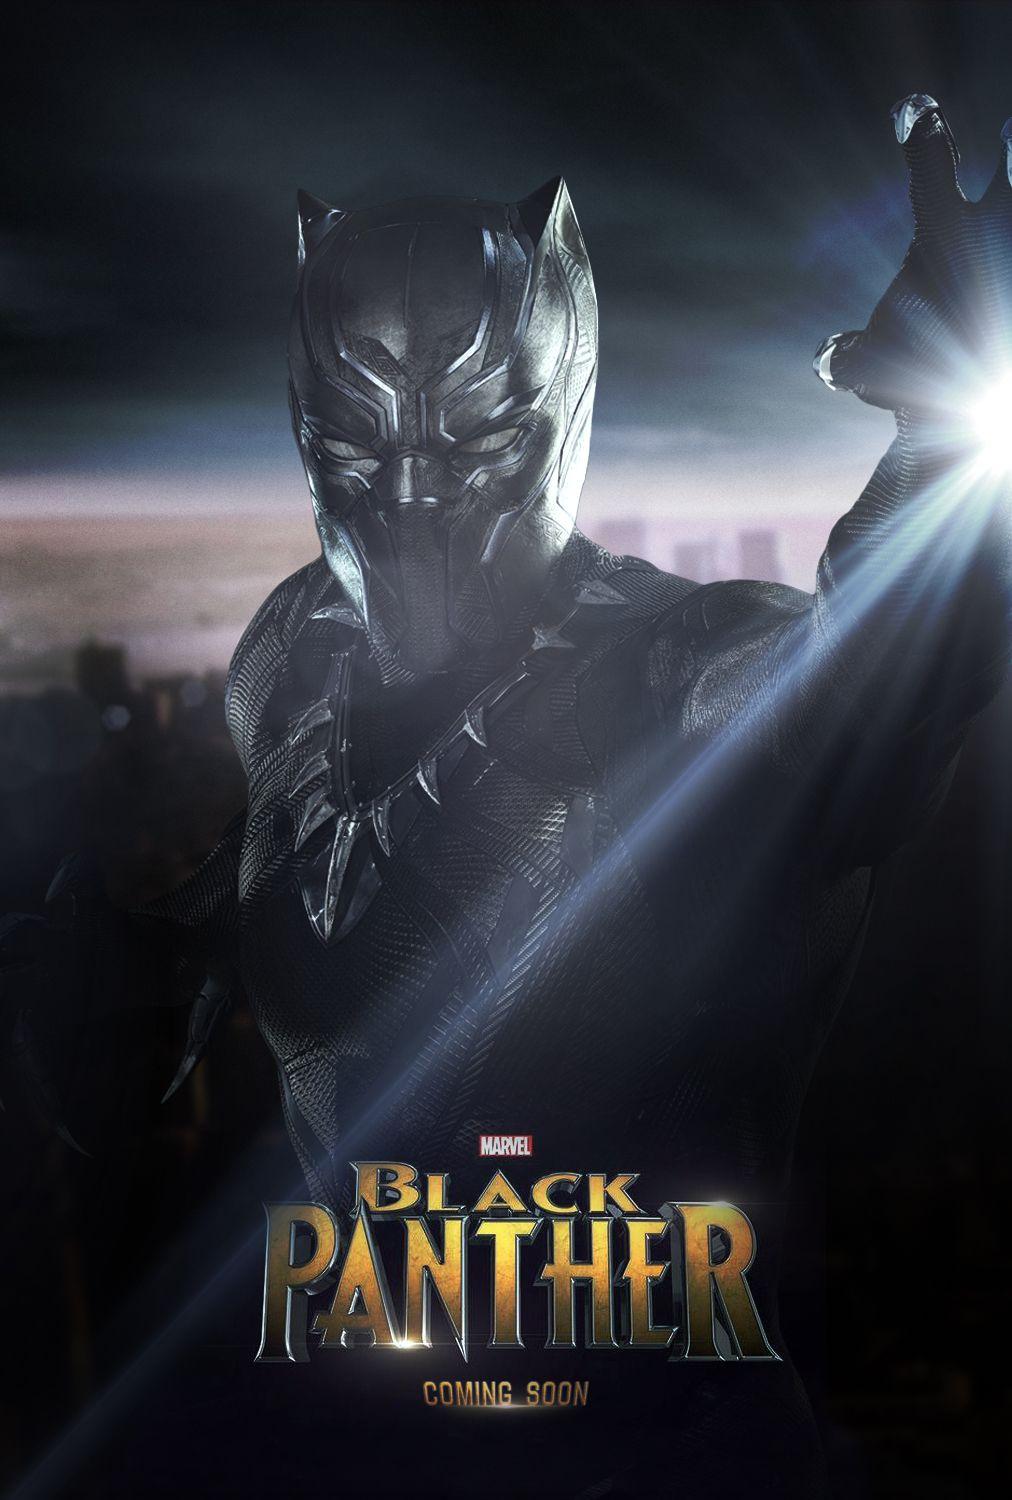 Black Panther Movie Poster wallpapers in Marvel